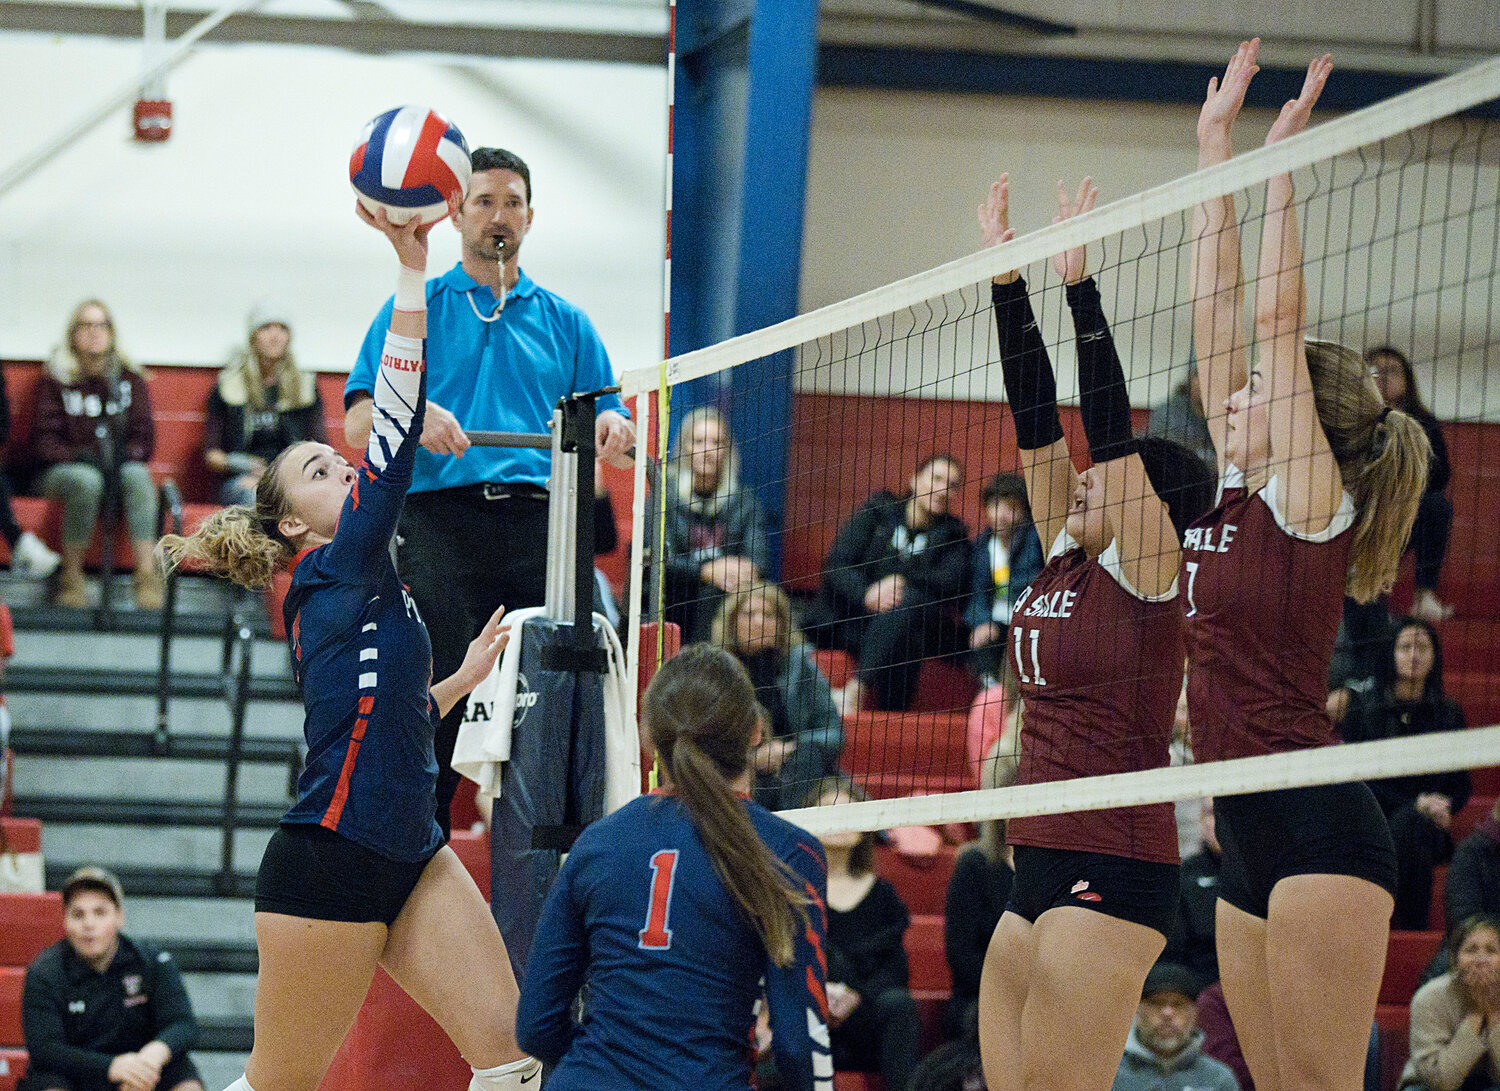 Danielle Bannister spikes the ball over the net while rallying with La Salle.